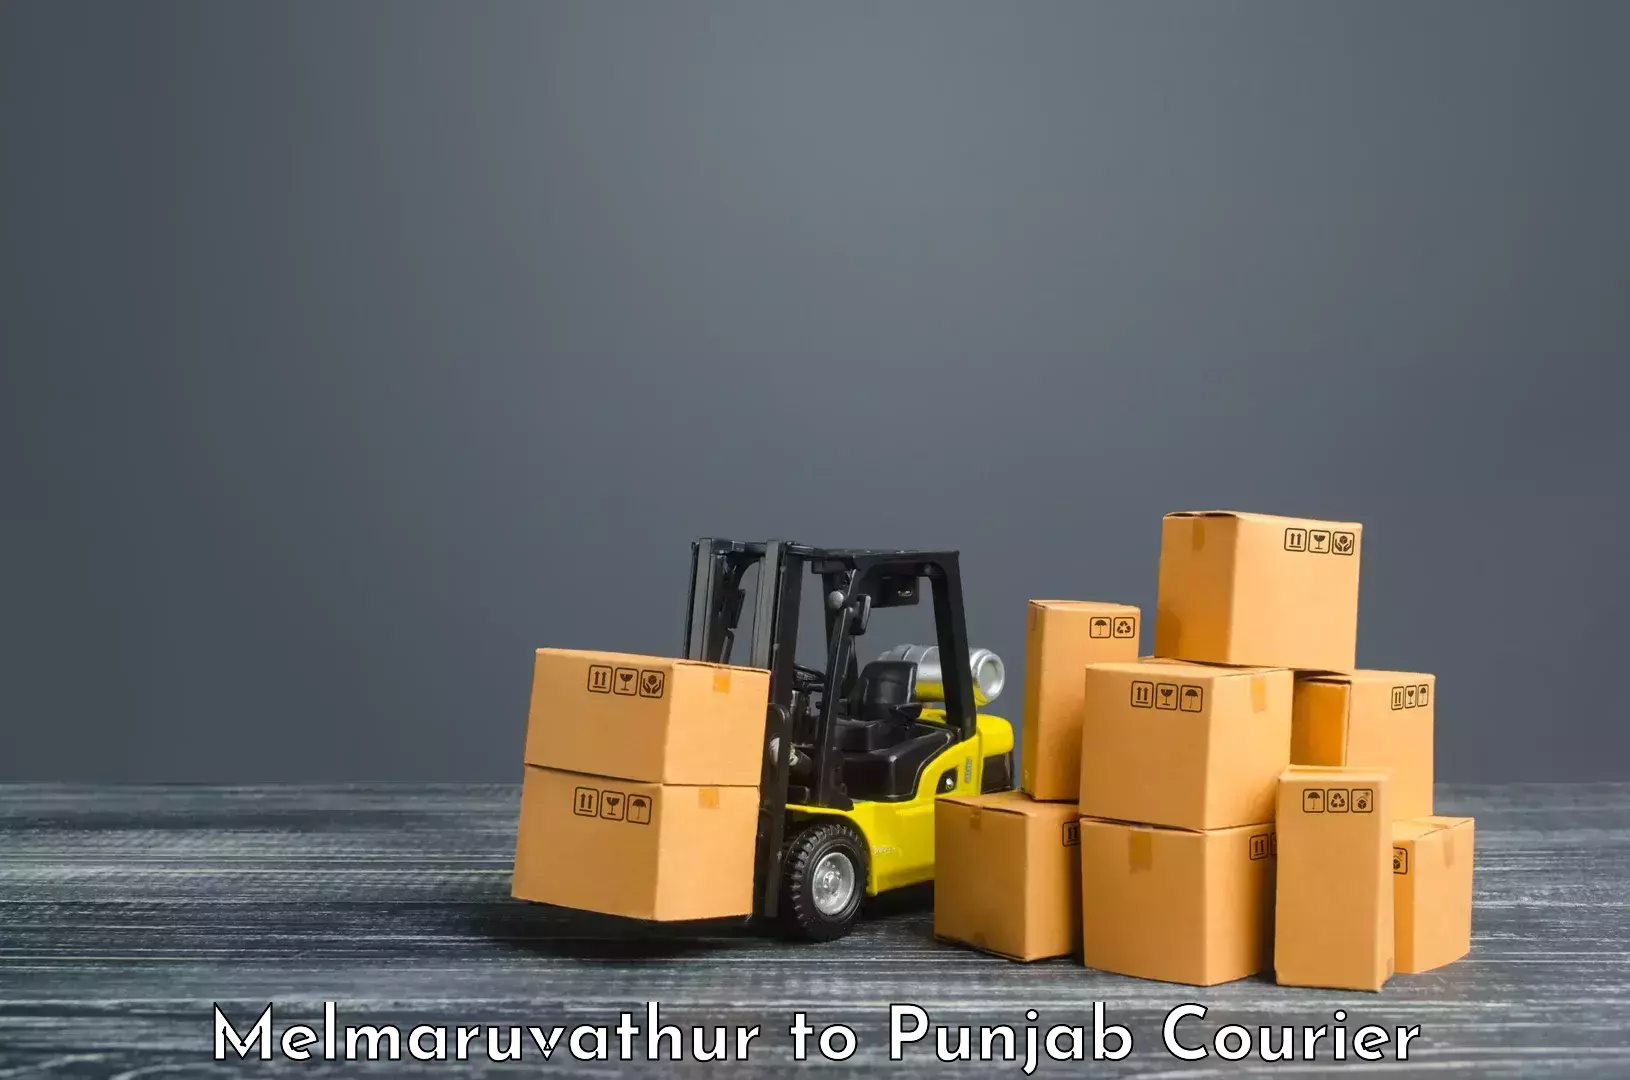 Express package transport Melmaruvathur to Pathankot